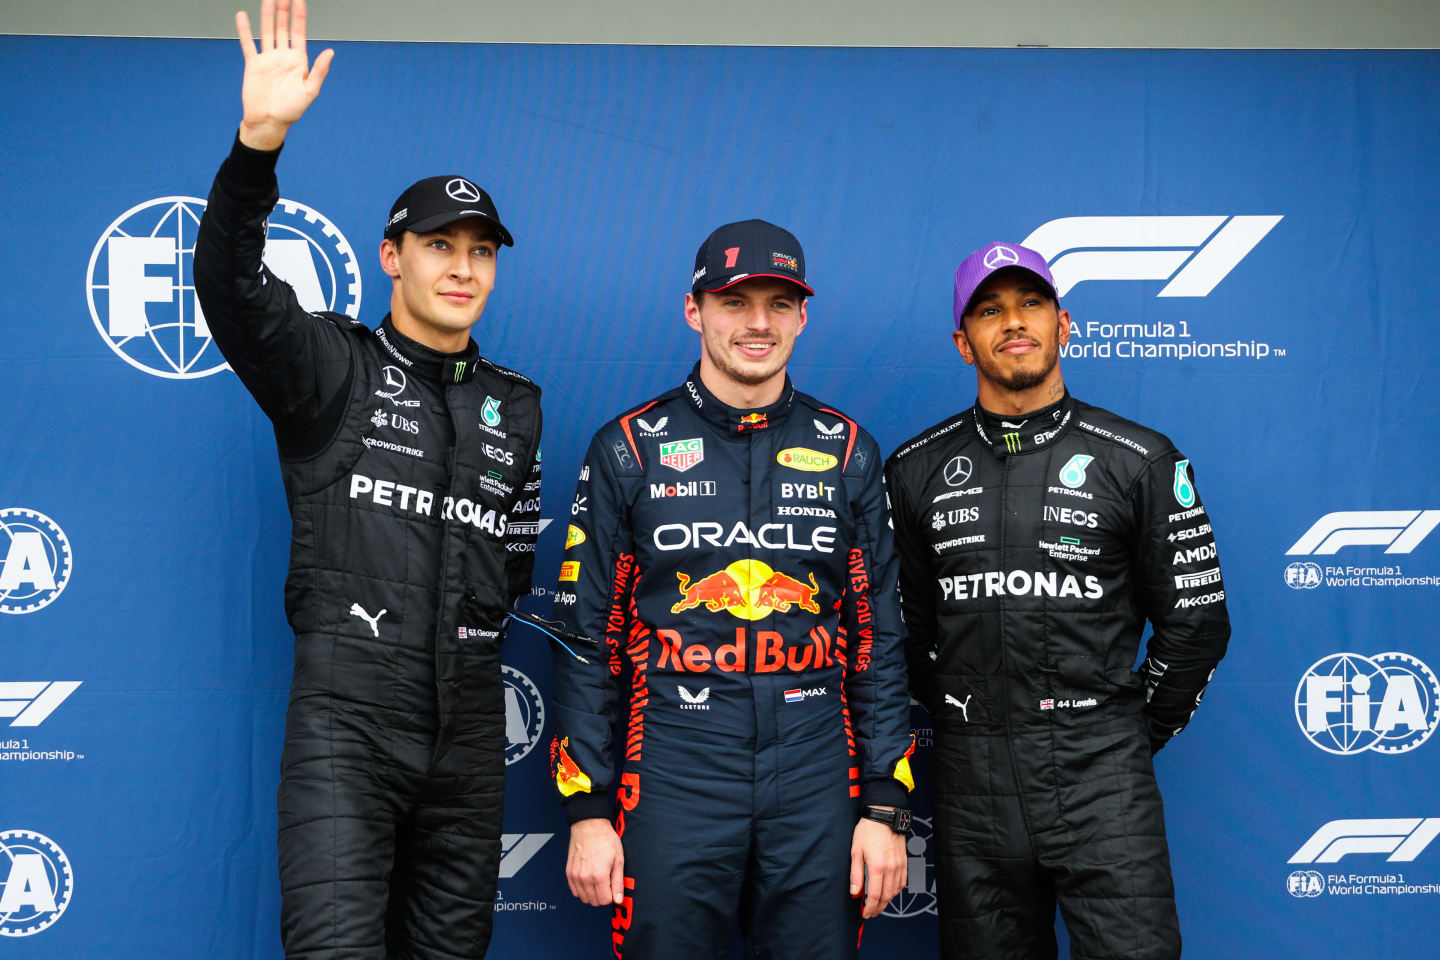 MELBOURNE, AUSTRALIA - APRIL 01: George Russell of Mercedes and Great Britain, Max Verstappen of Red Bull Racing and The Netherlands and Lewis Hamilton of Mercedes and Great Britain during qualifying ahead of the F1 Grand Prix of Australia at Albert Park Grand Prix Circuit on April 01, 2023 in Melbourne, Australia. (Photo by Peter Fox/Getty Images)